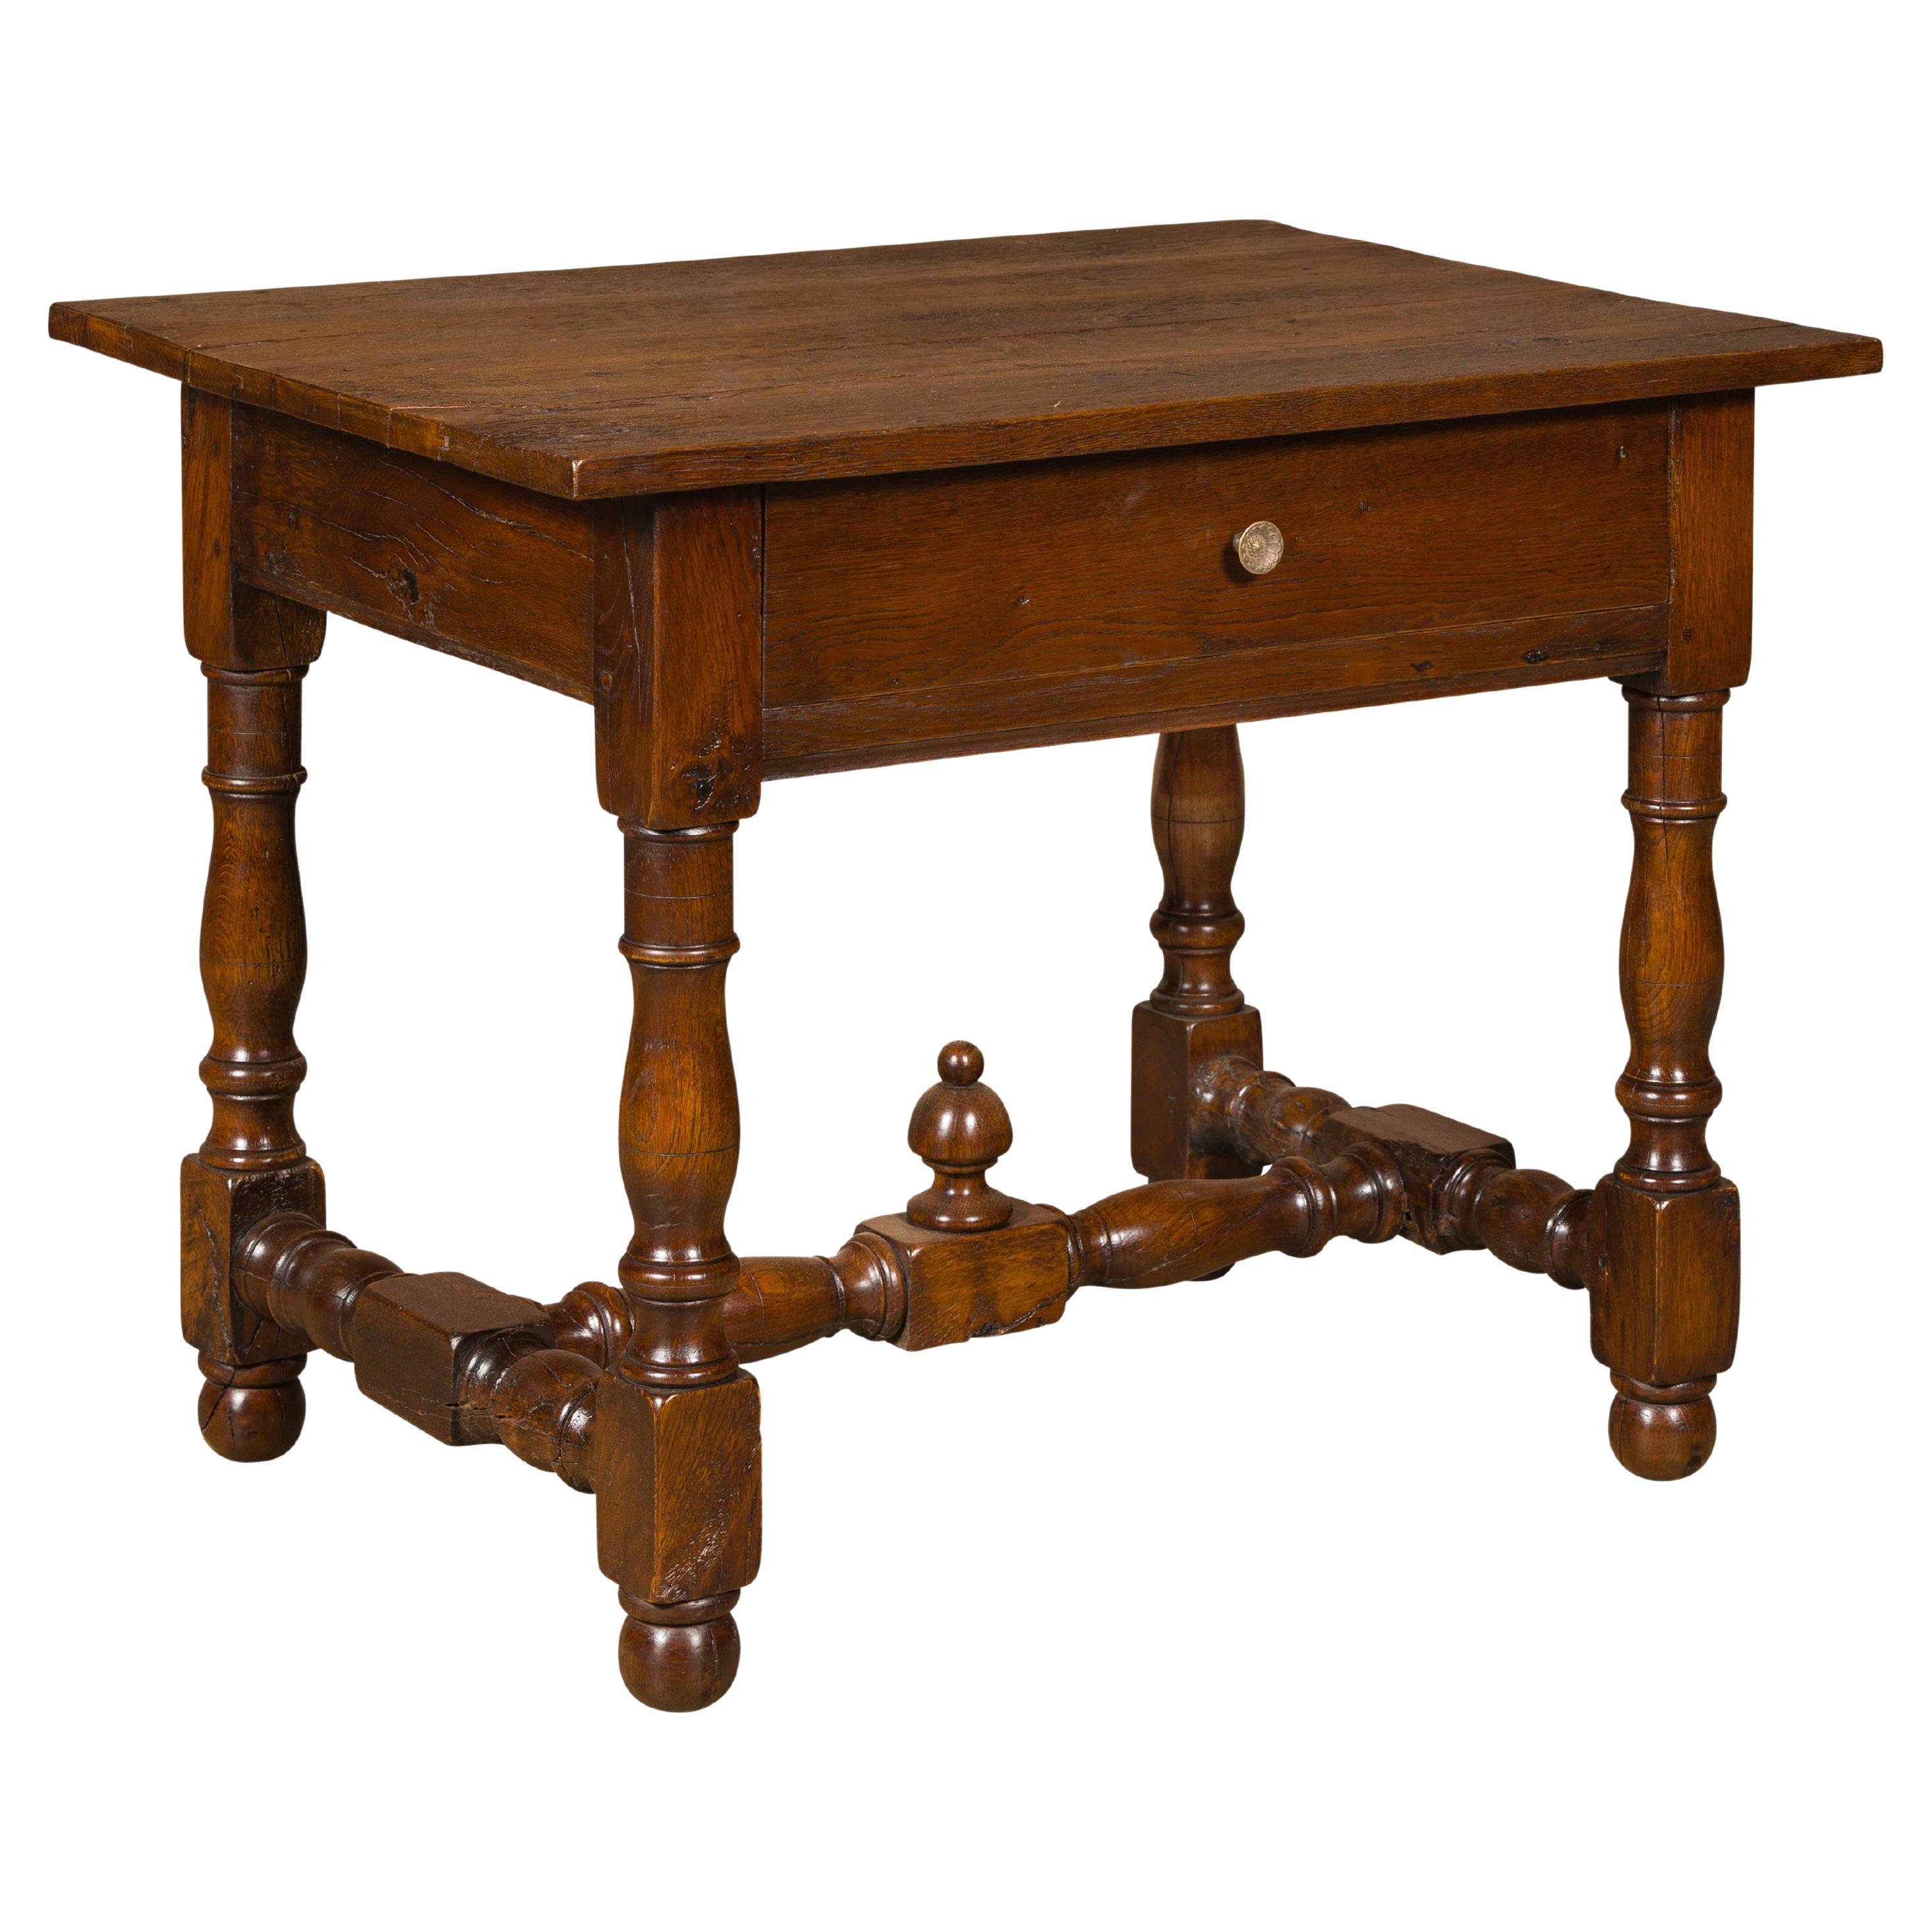 18th Century English Oak Side Table with Single Drawer and Turned Base